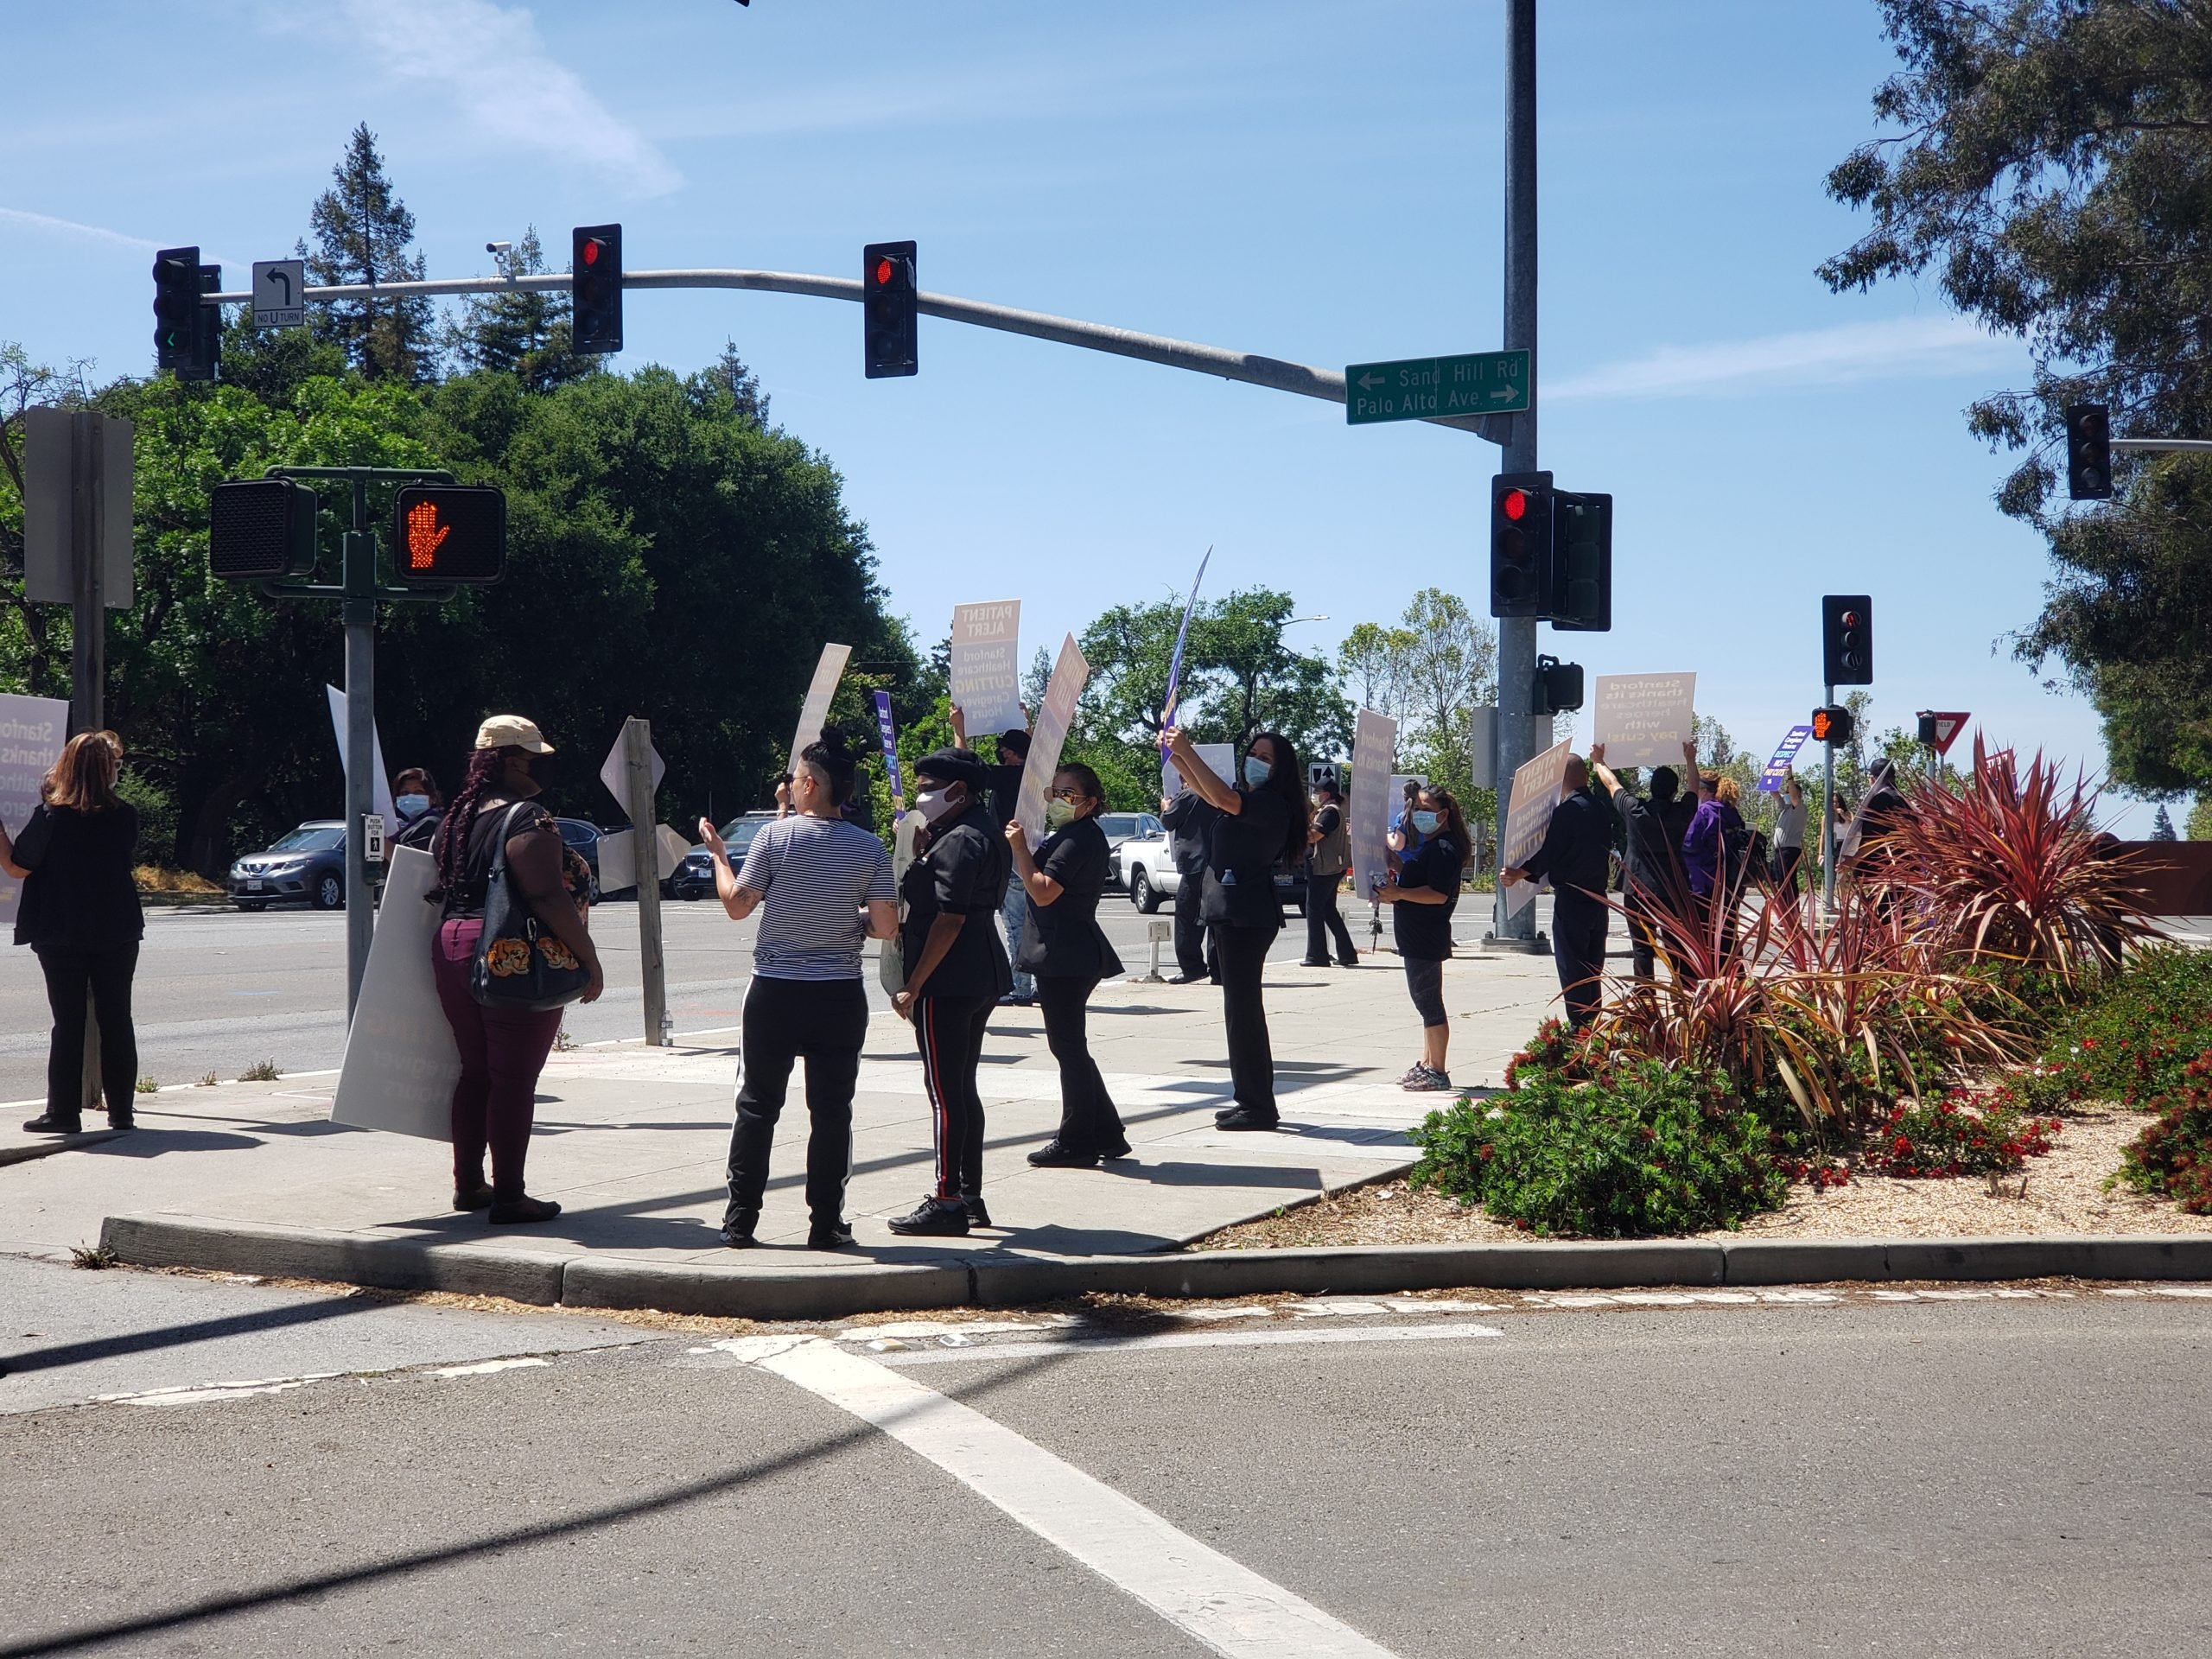 Healthcare workers protest while maintaining social distancing on the corner of Sand Hill Road and El Camino Real.